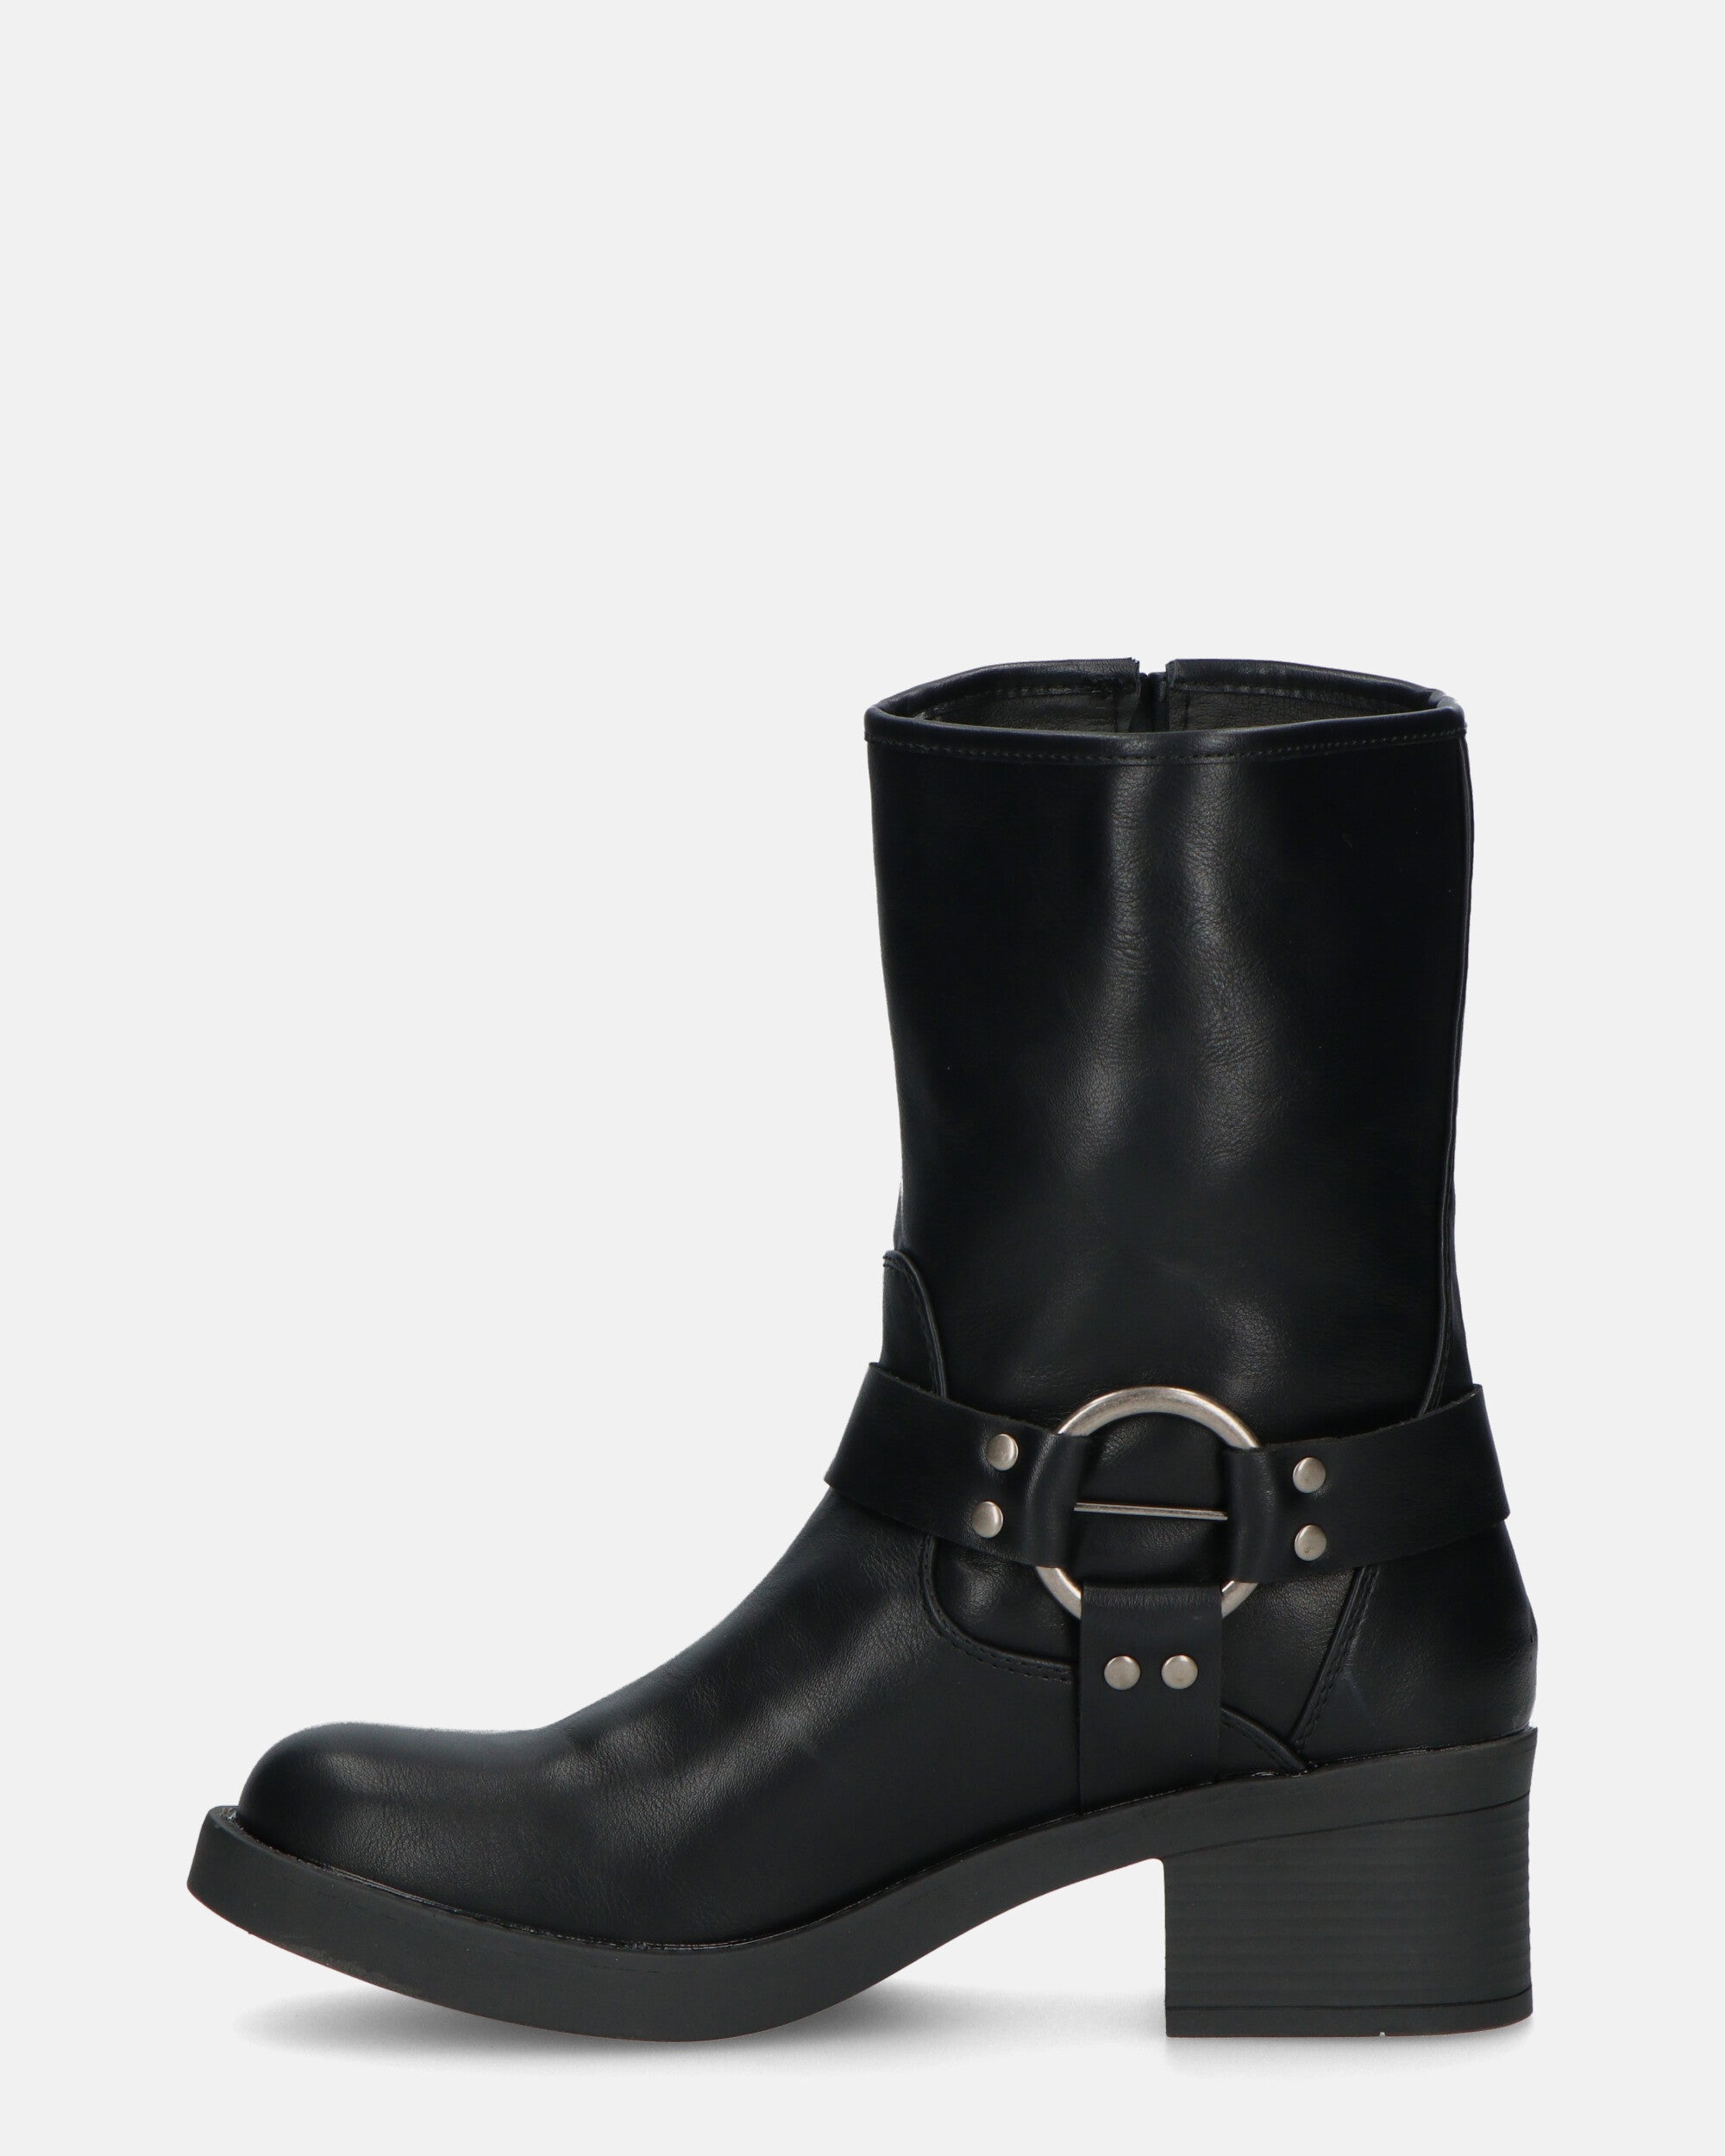 RISA - black ankle boots with straps and buckles